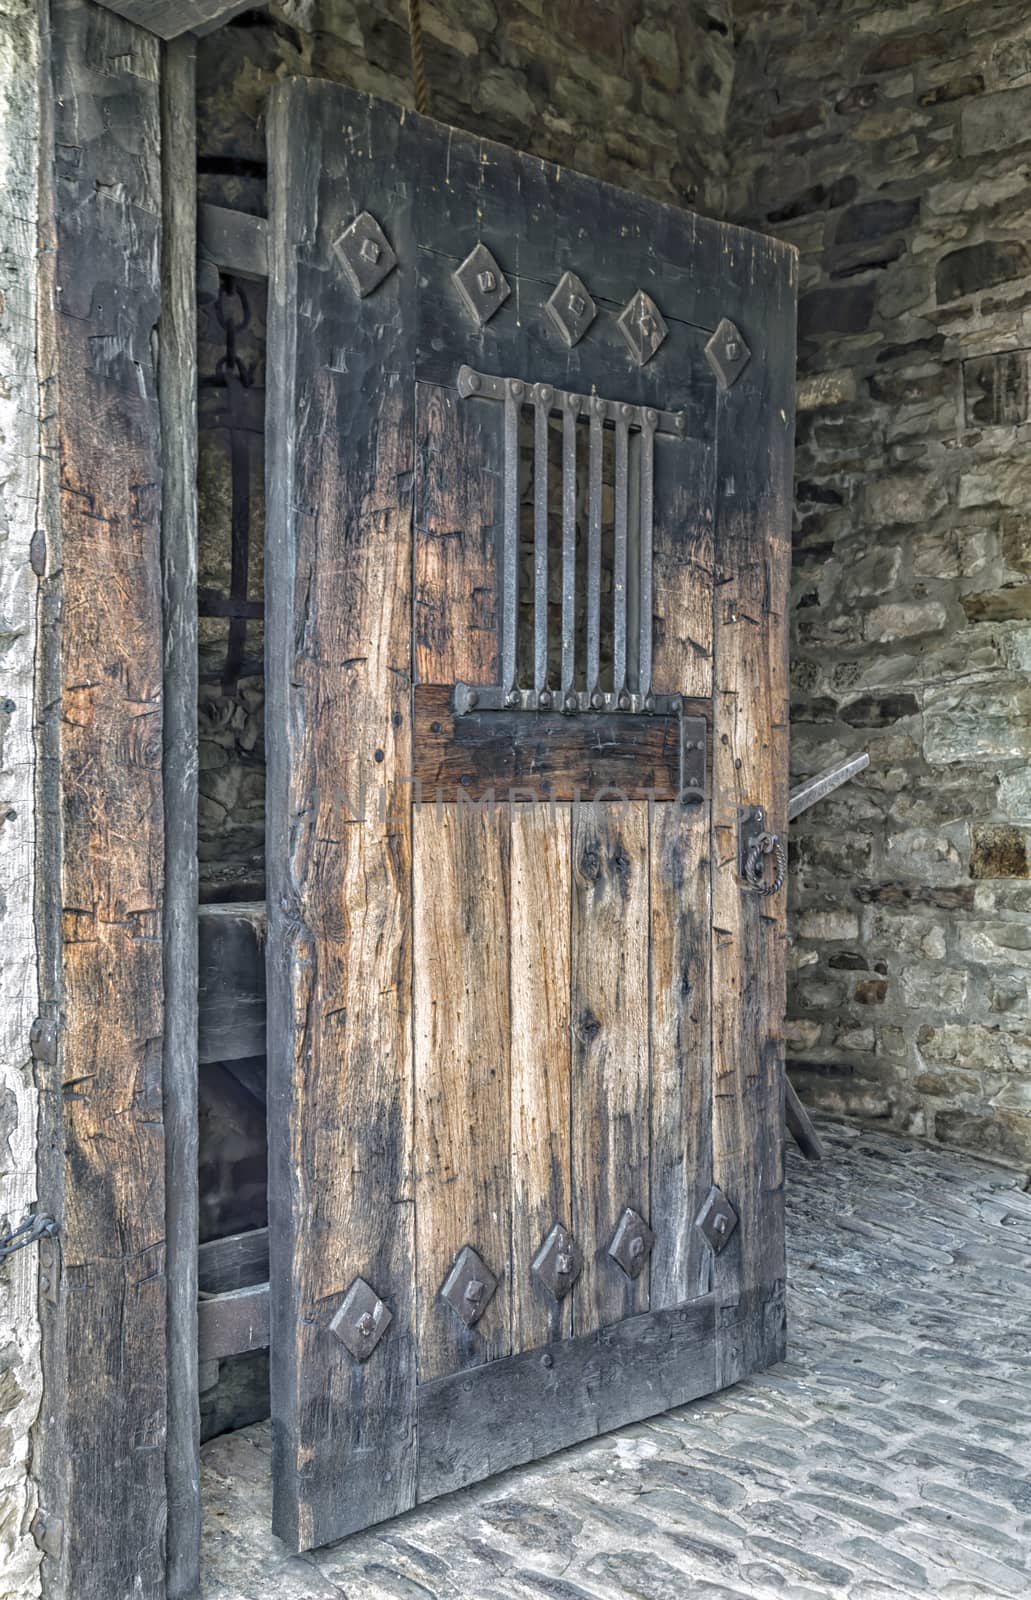 Heavy aged wooden door propped open. There are large iron bars and hinges.
